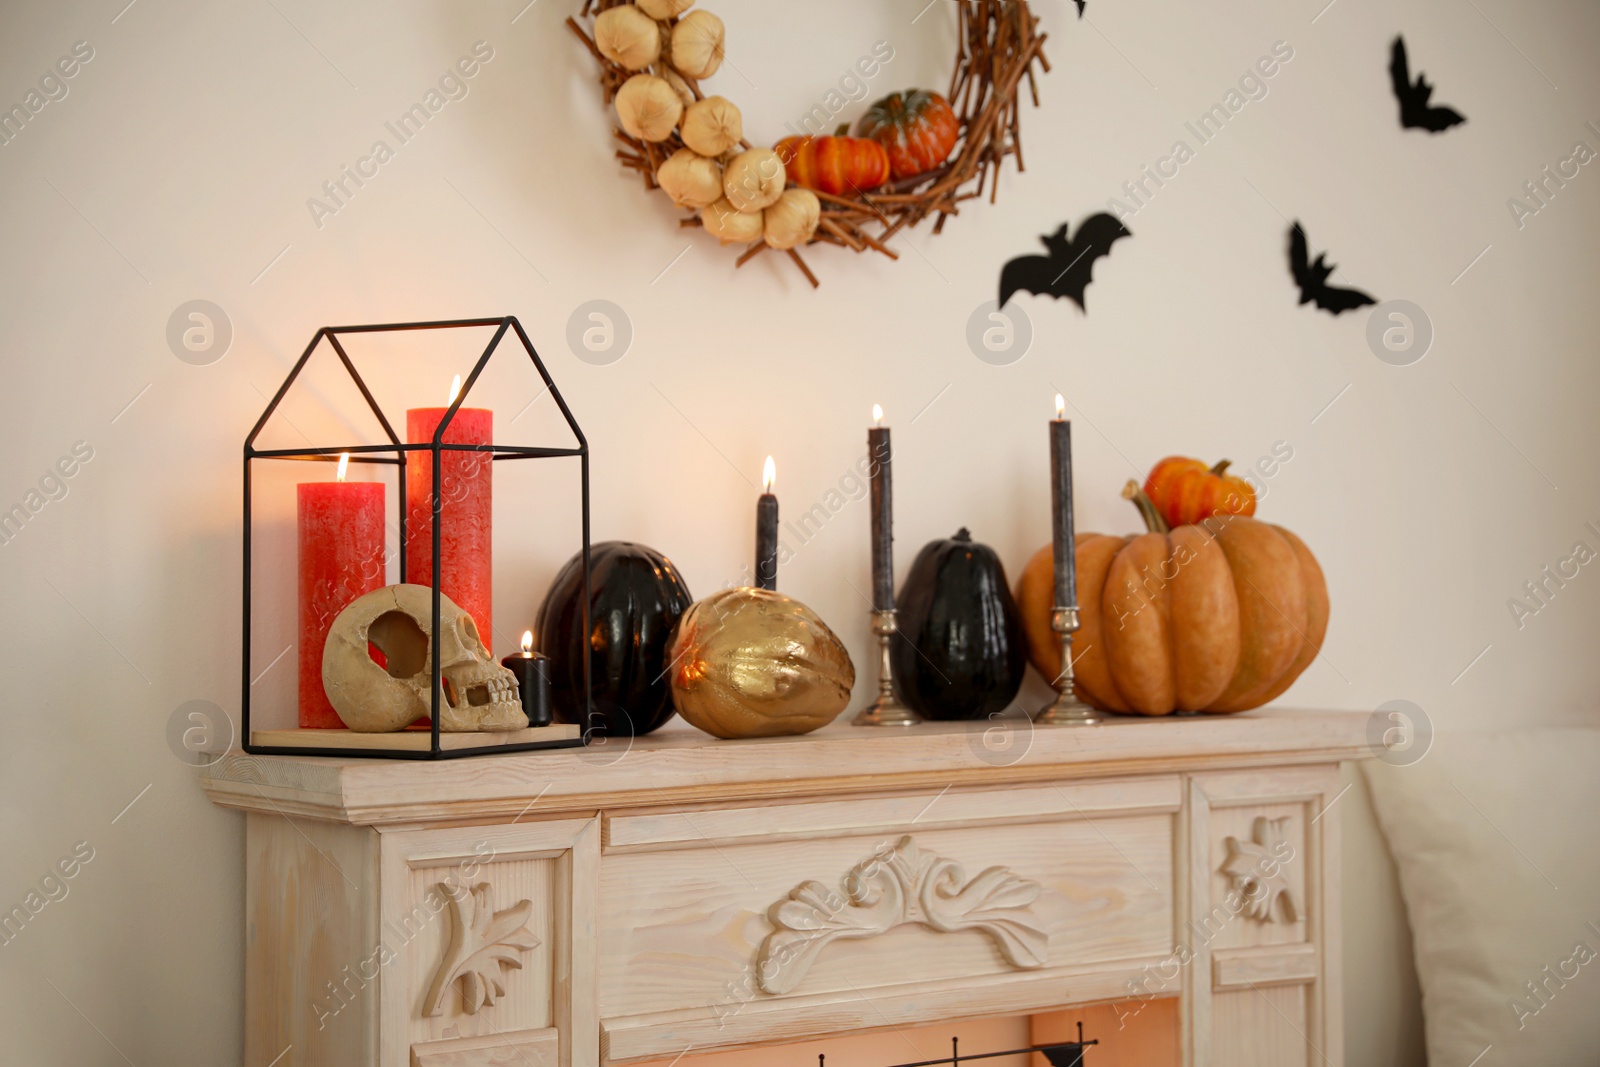 Photo of Fireplace and Halloween decor in room. Idea for festive interior